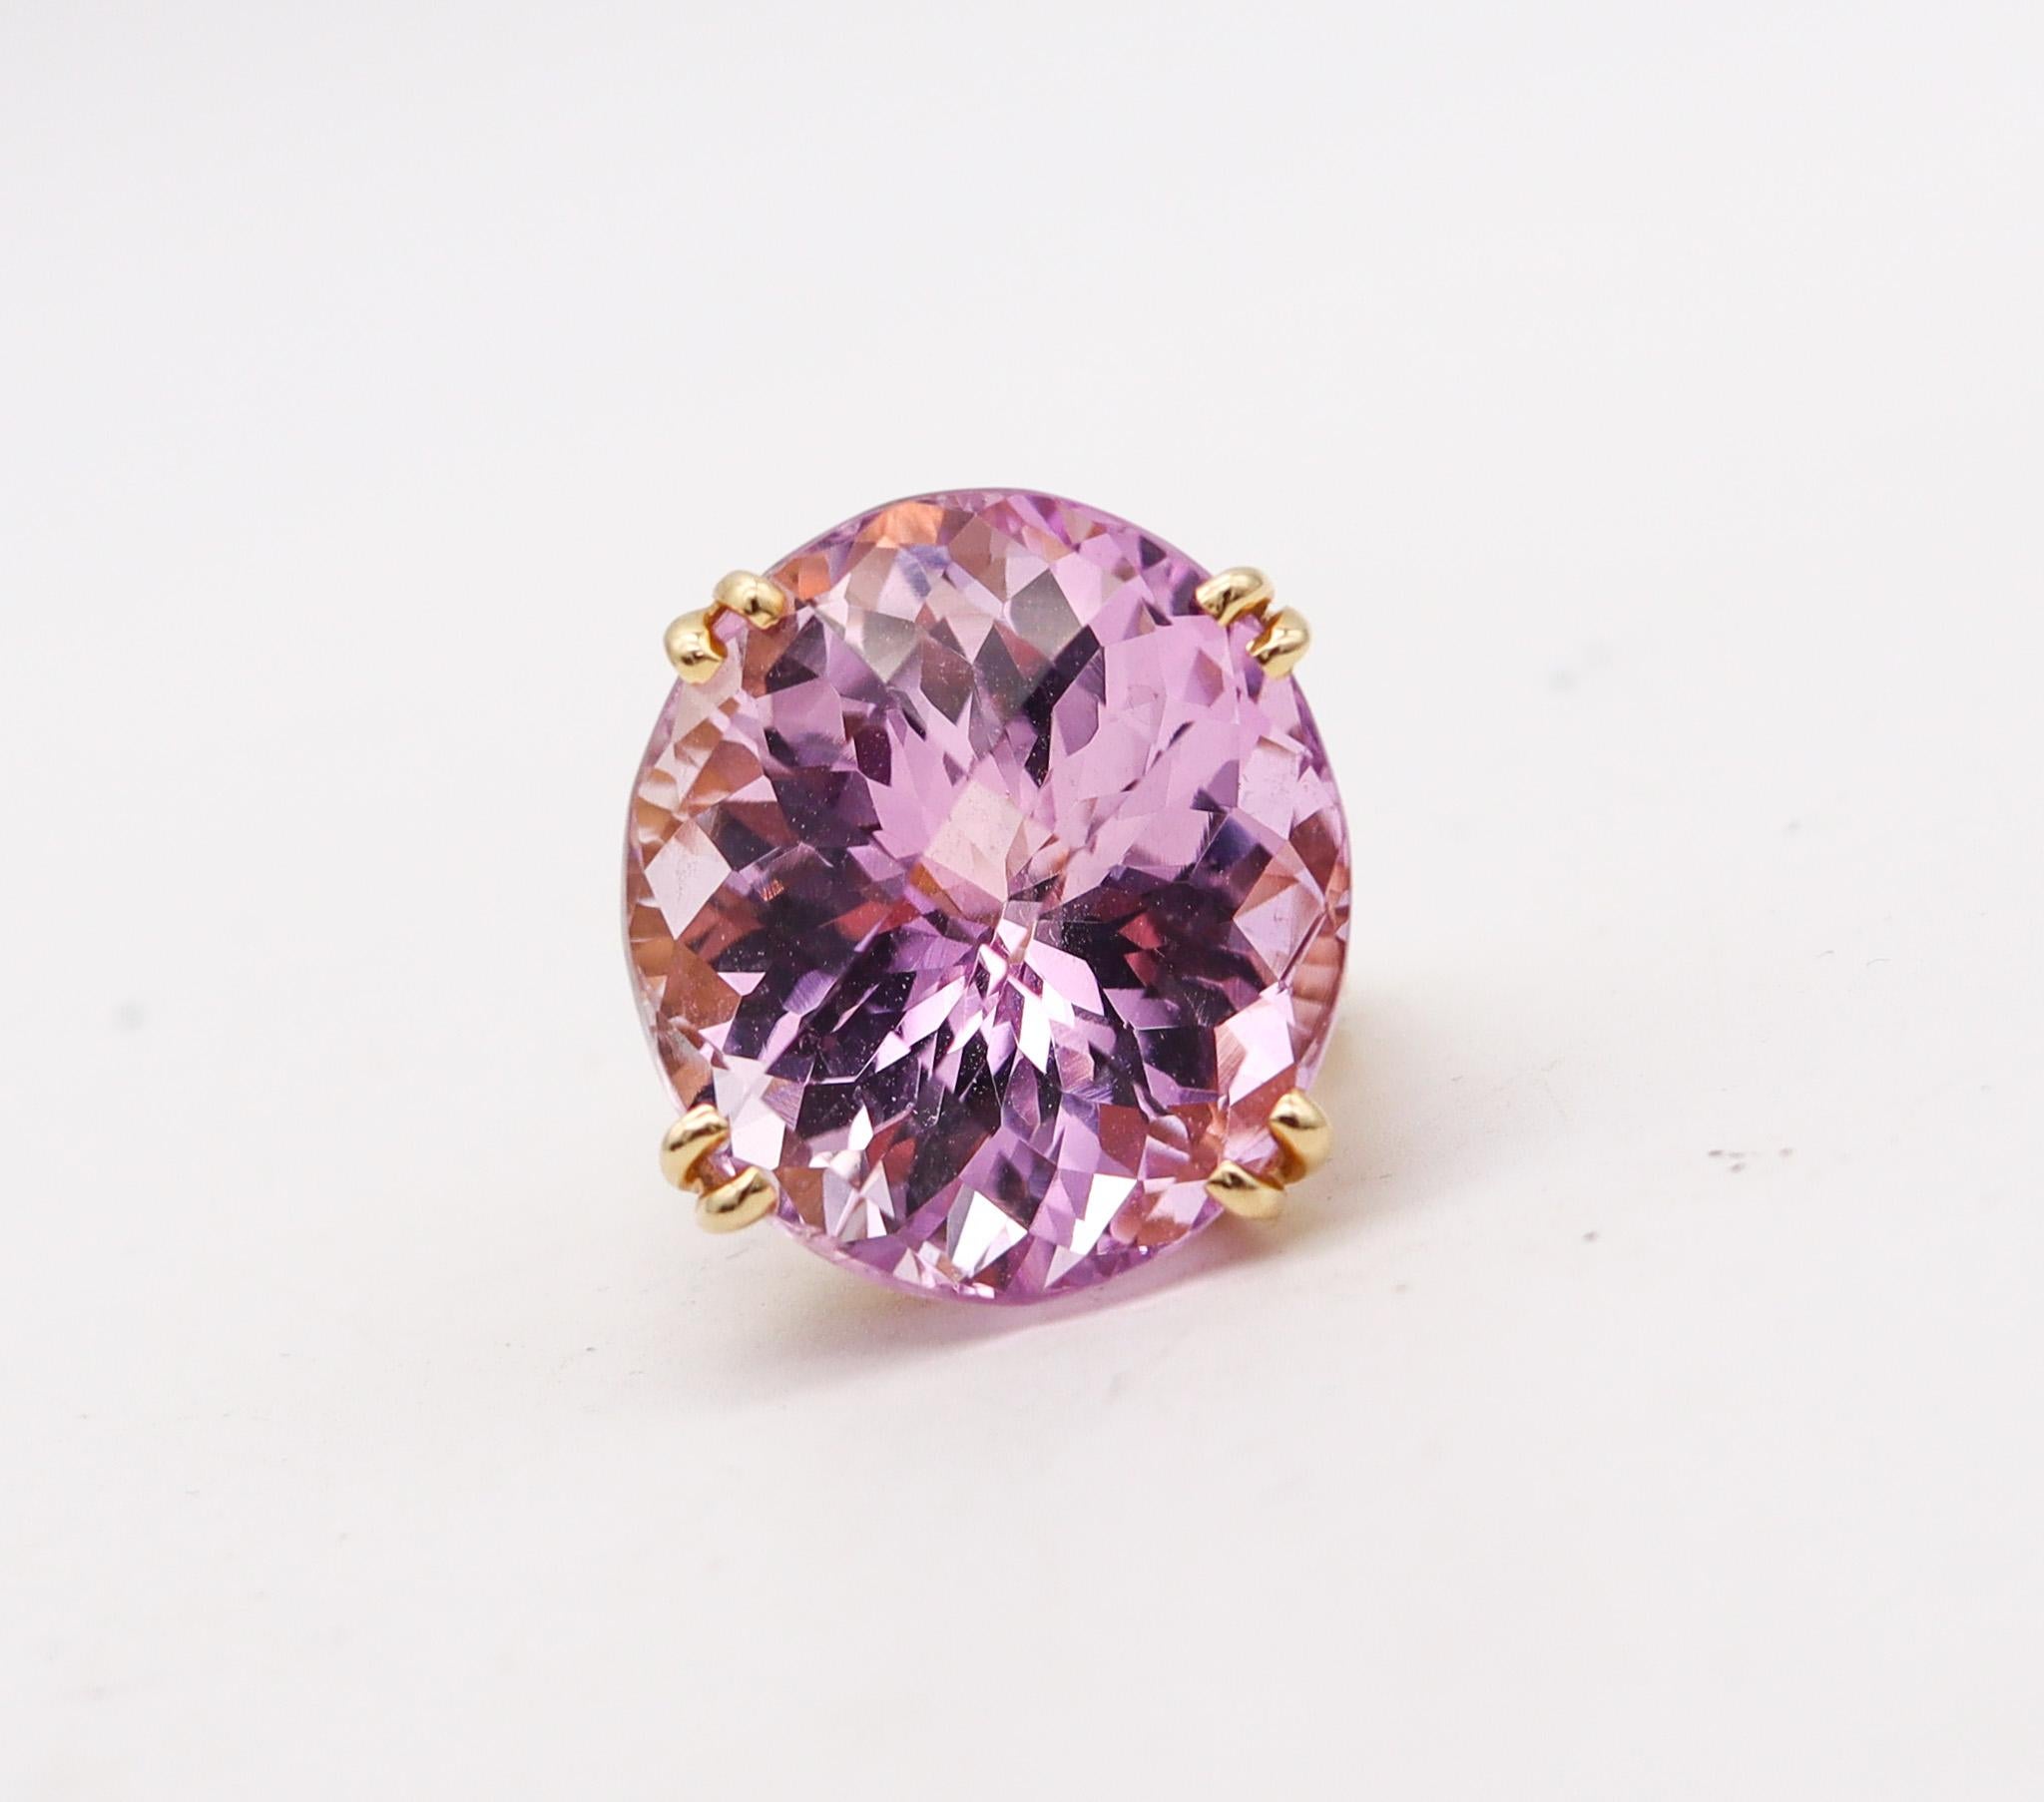 Modern cocktail ring with a large kunzite.

Gorgeous oversized modernist ring, crafted in Italy in solid yellow gold of 14 karats with high polished finish. This ring was designed as a solitaire with sleek contemporary patterns and the mounting was